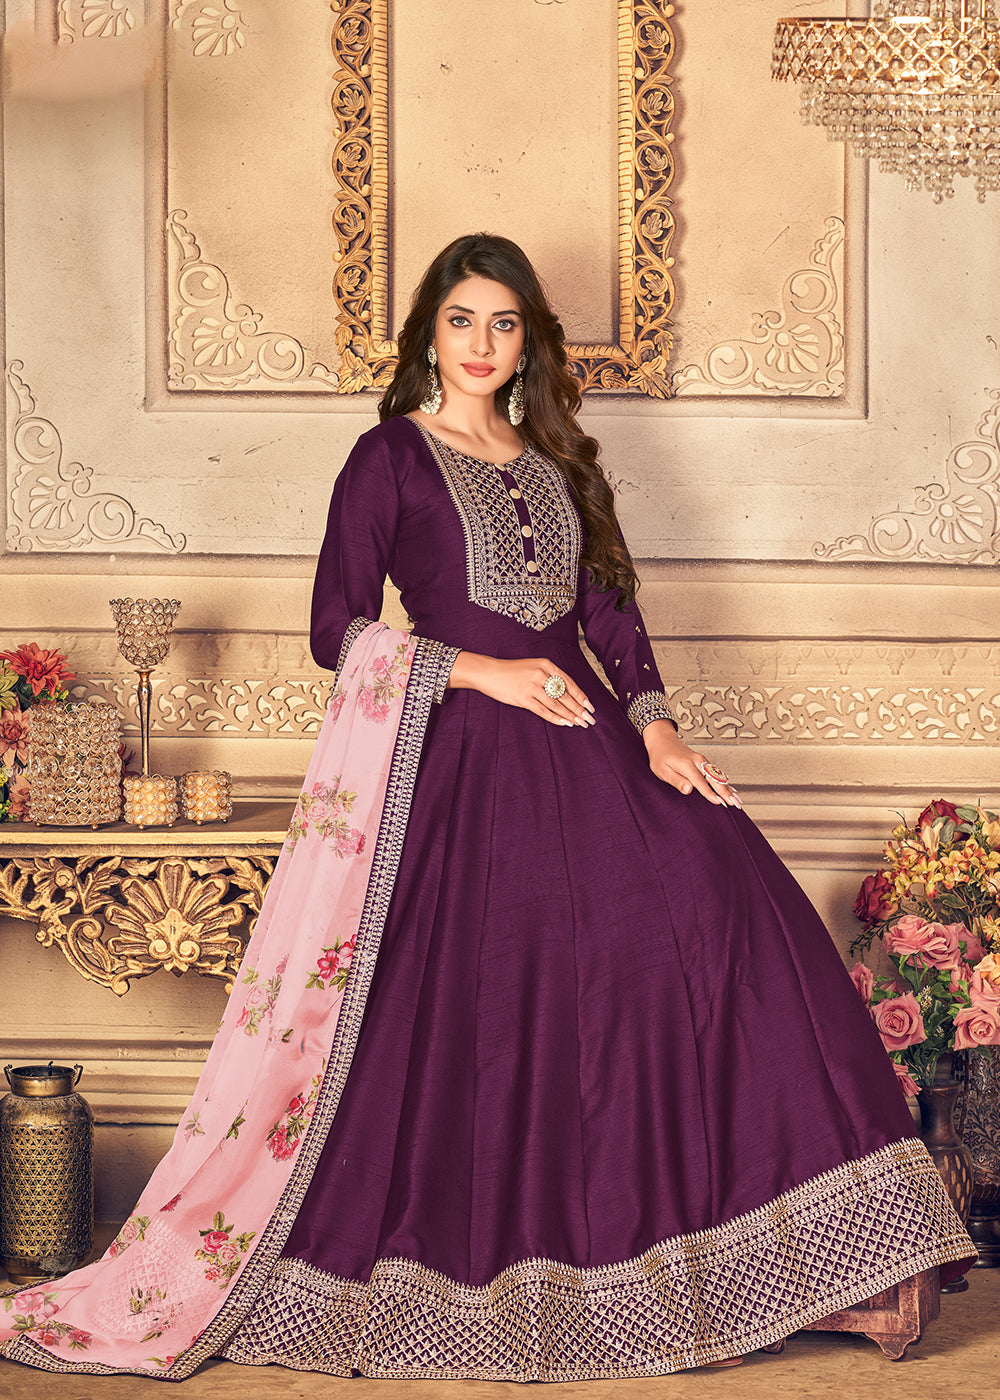 Buy Now Plum Purple Silk Beautifully Embroidered Floor Length Anarkali Suit Online in Canada at Empress Clothing. 